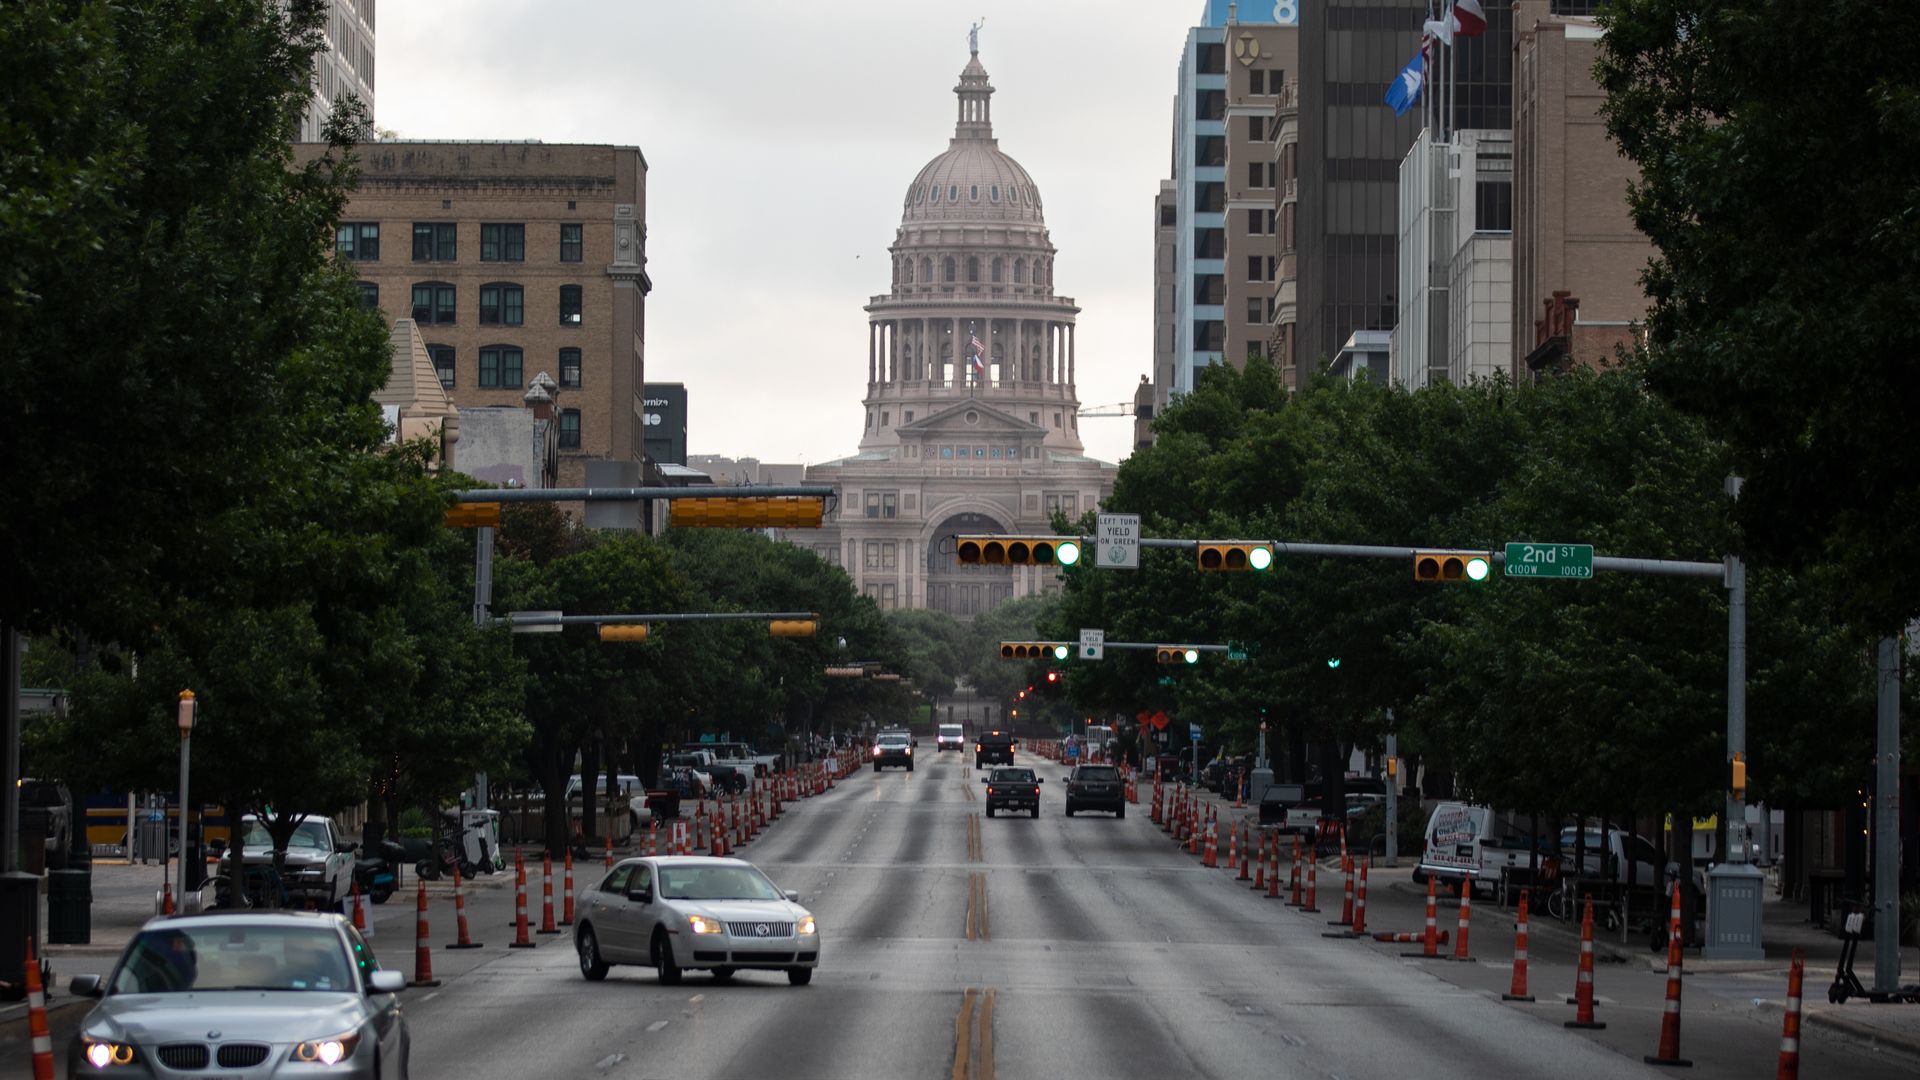 The Texas State Capitol building on July 14.